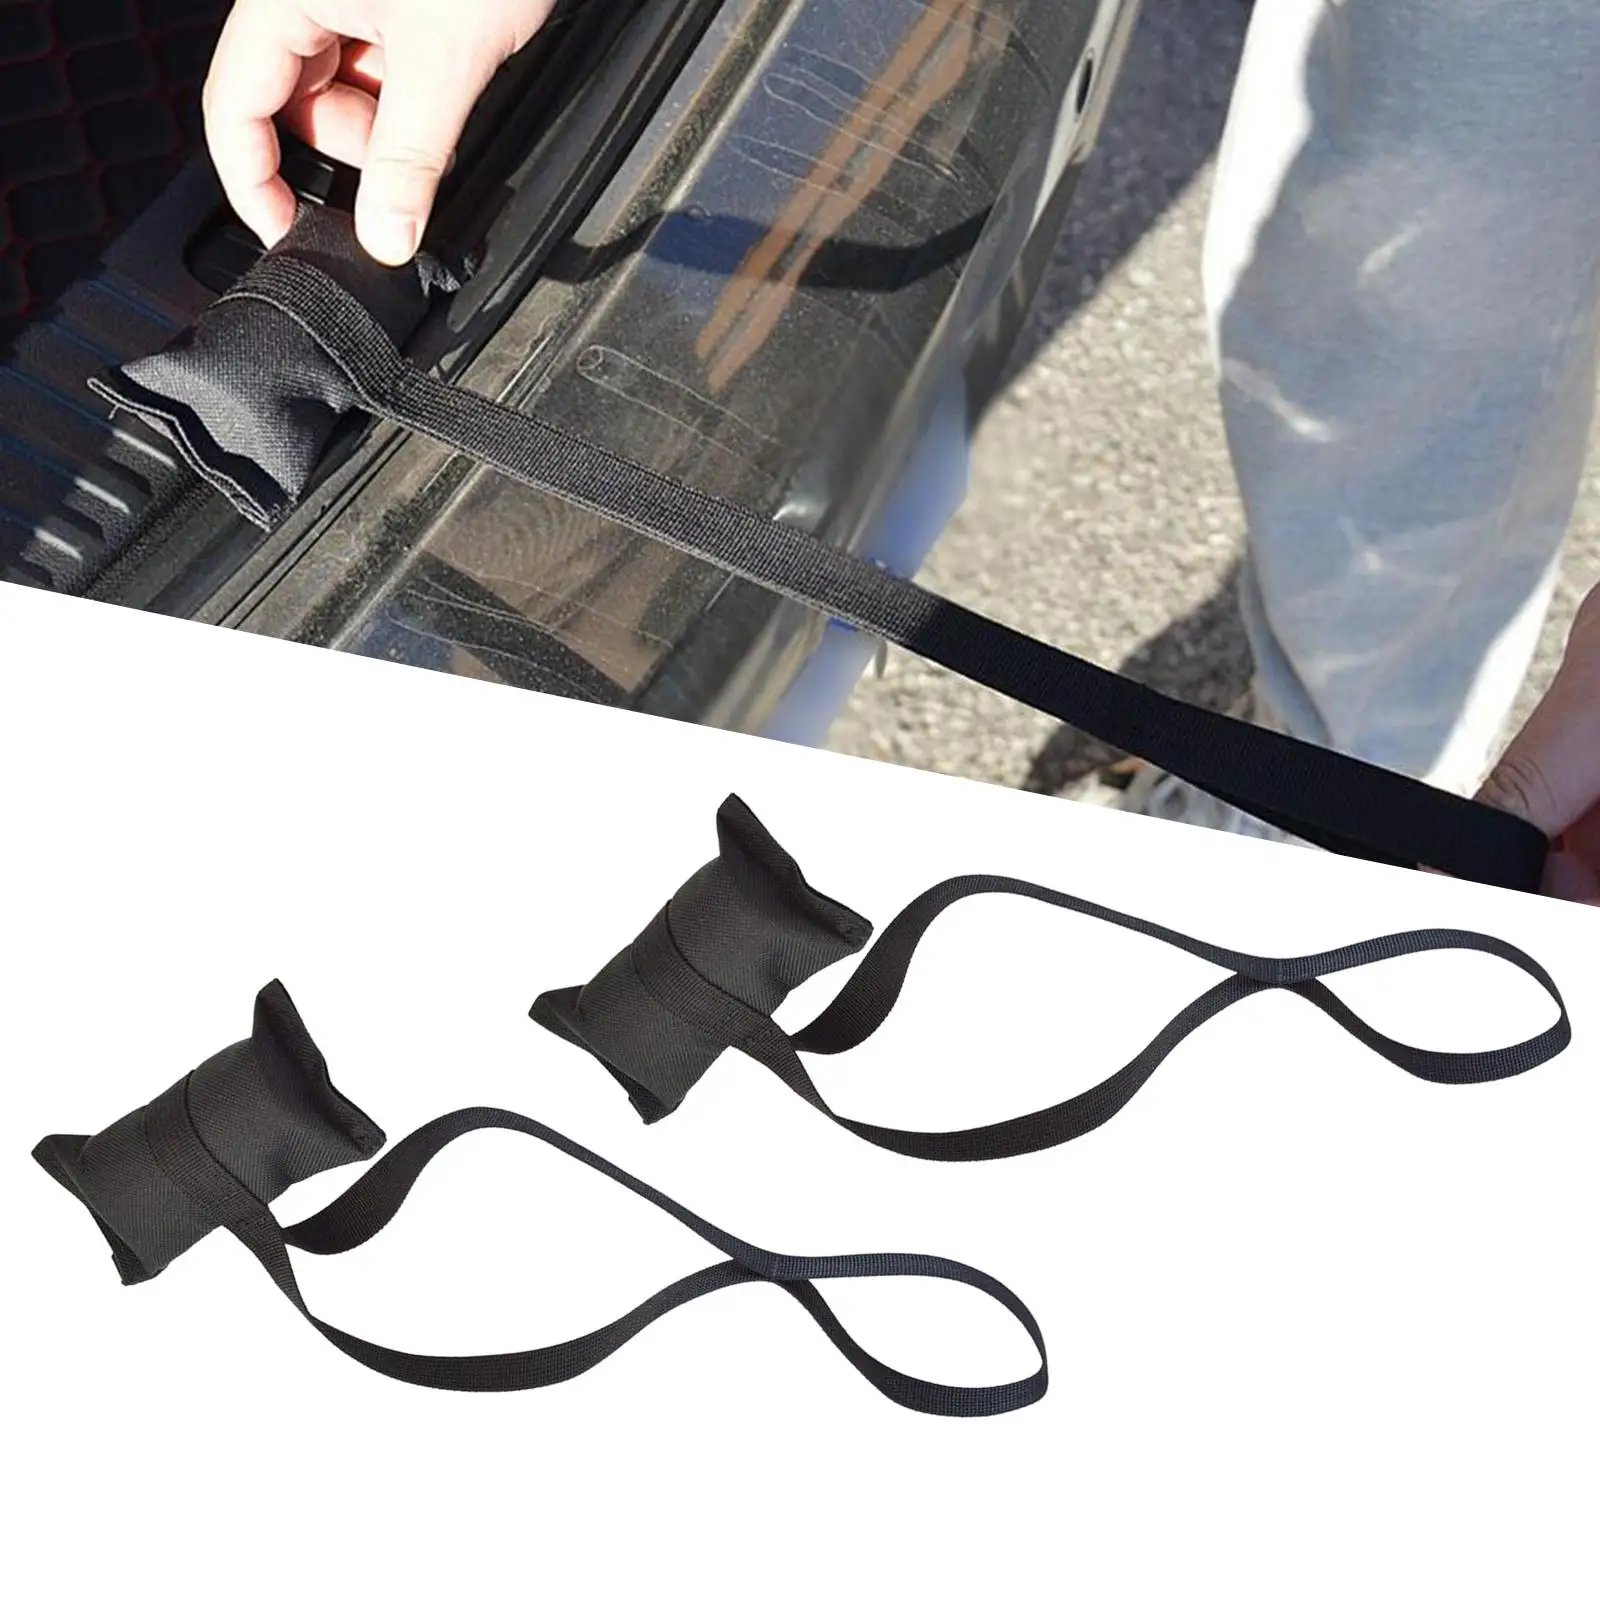 Canoe Anchors Tie Down Cars Hoods Easy Installation Quick Loops Disassembly for